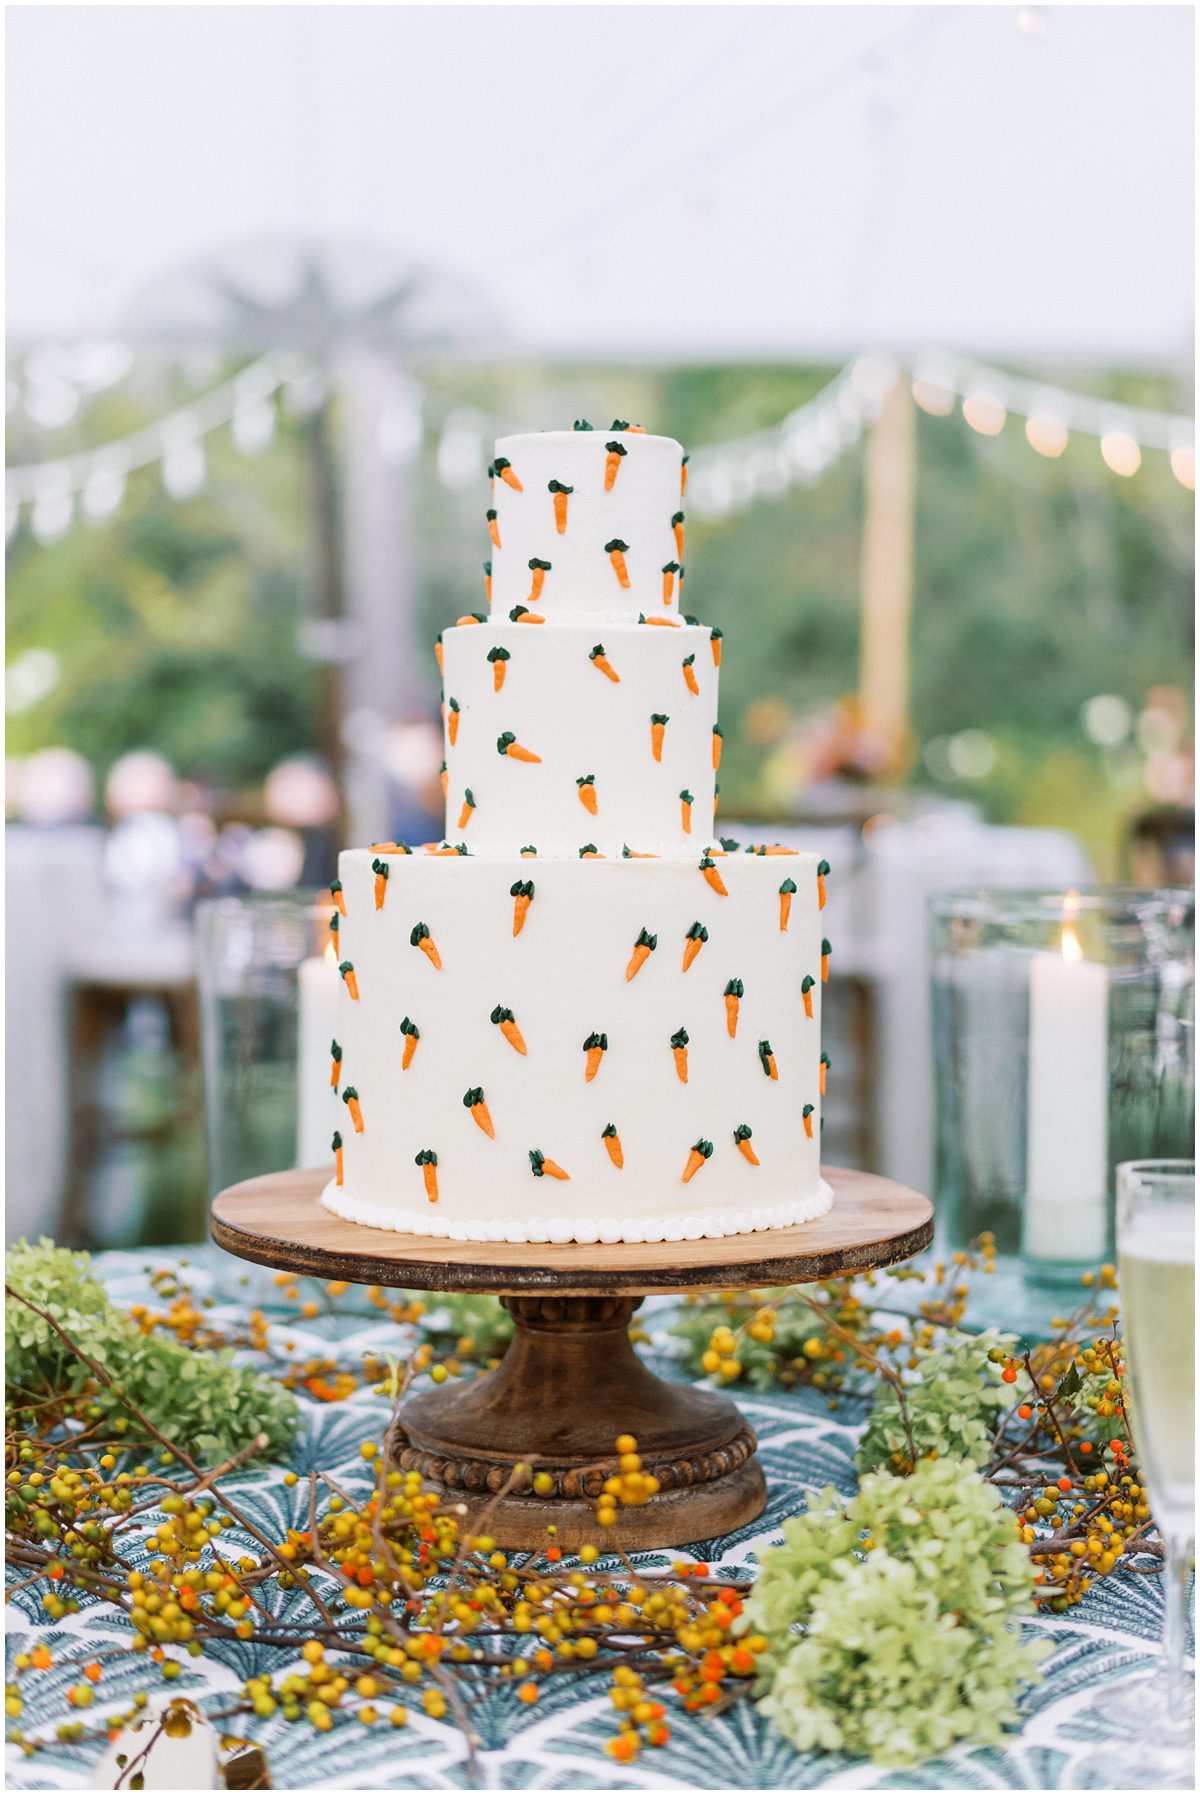 The stunning carrot cake designed by Mountaintop Golf and Lake club, decorated with delicate frosting and tiny carrots, is a work of art that perfectly captures the couple's personalities